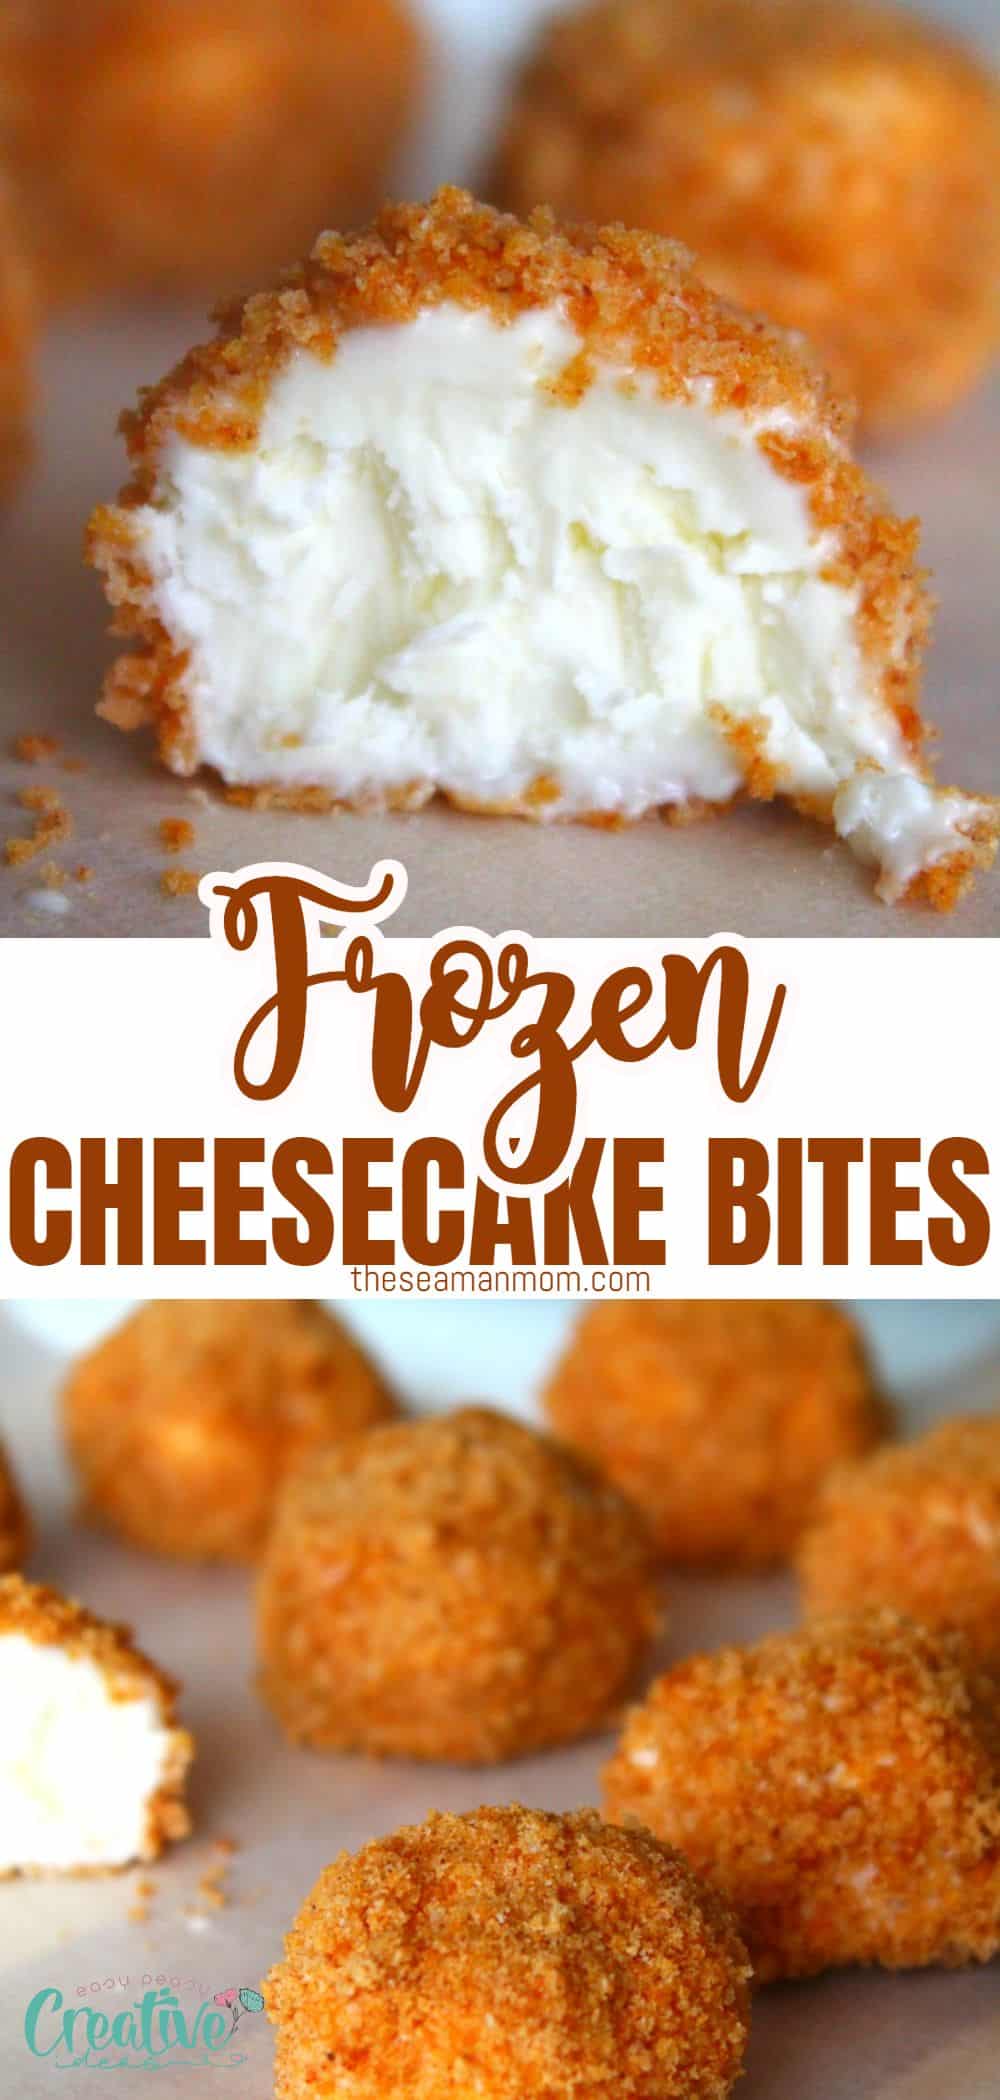 Searching for the perfect sweet treat to bring to your next get-together? Look no further than these luscious, creamy and icy frozen cheesecake bites coated in gingerbread crumbs - all without having to preheat your oven! via @petroneagu